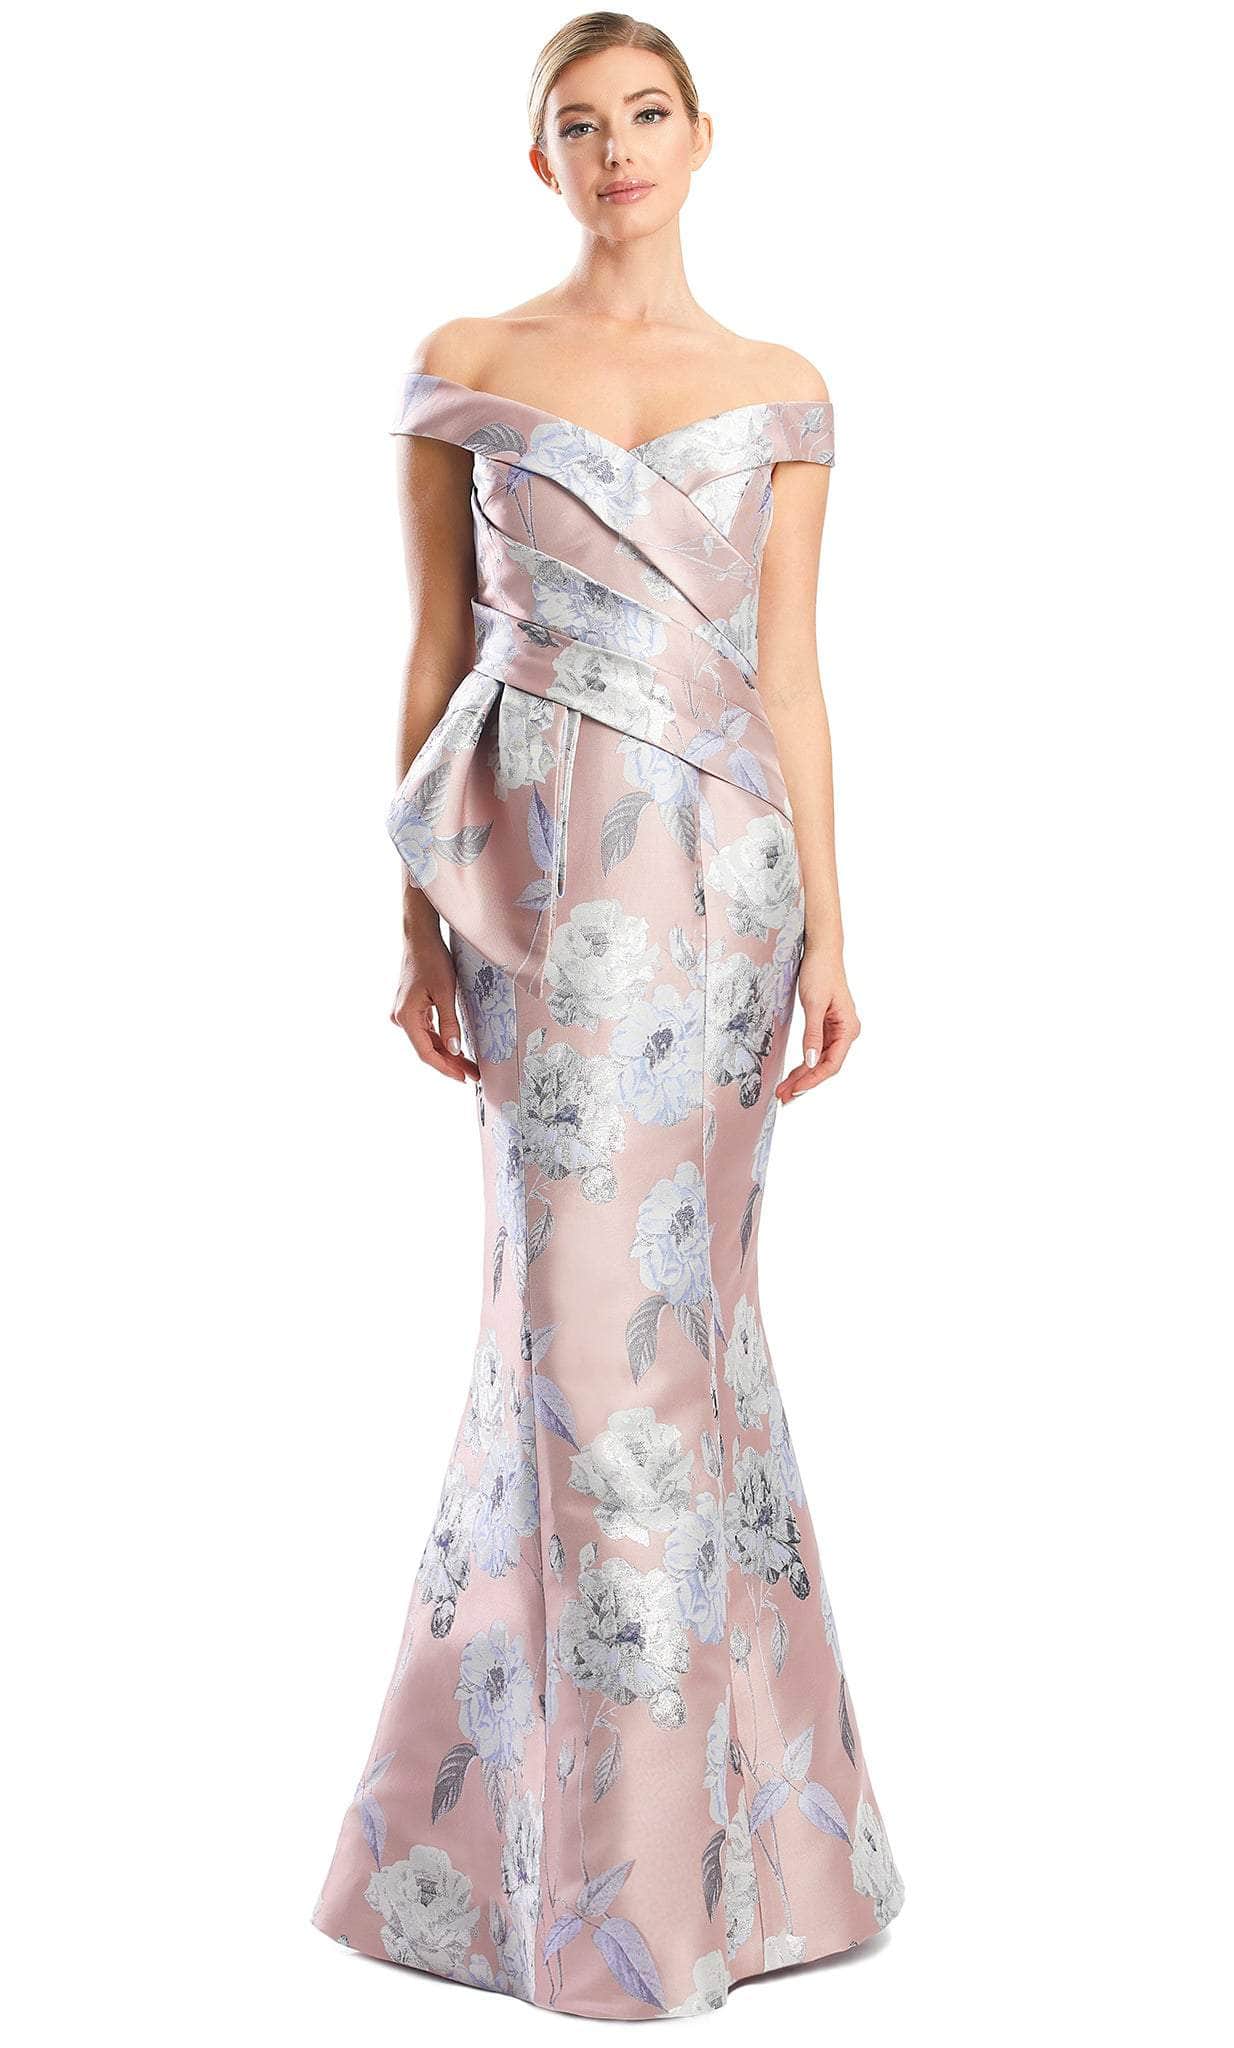 Alexander by Daymor 1767S23 - Floral Printed Evening Gown Evening Dresses 00 / Descoral/Multi